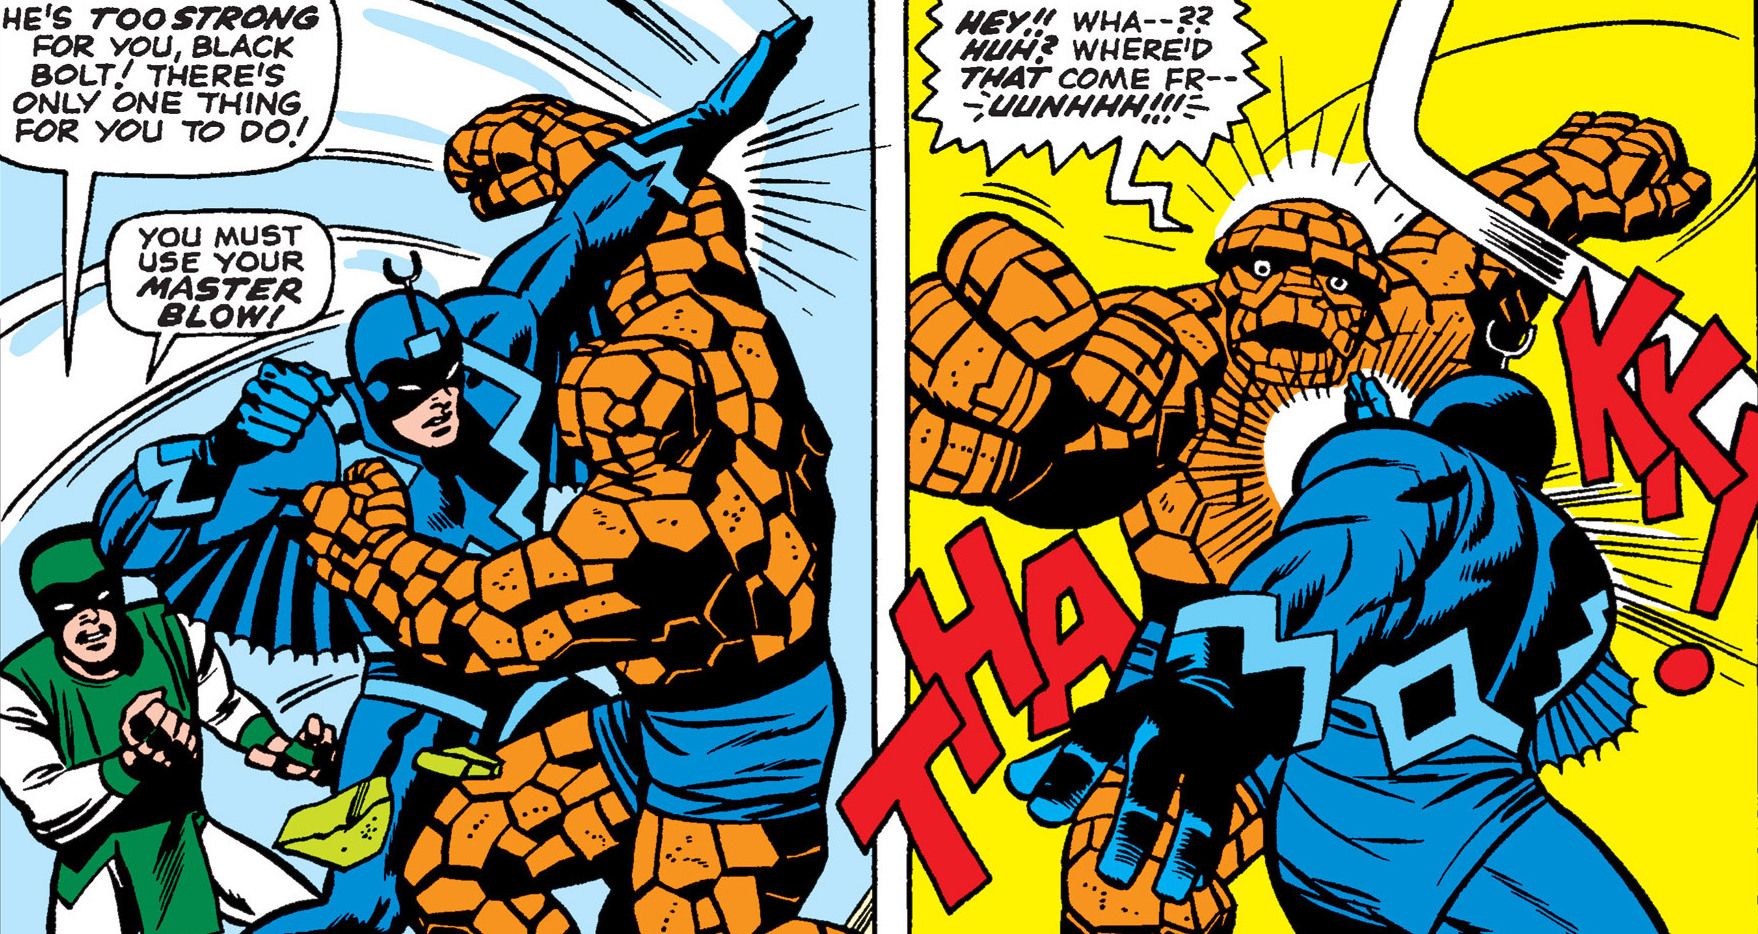 Black Bolt uses the Master Blow on The Thing Fantastic Four v1-46